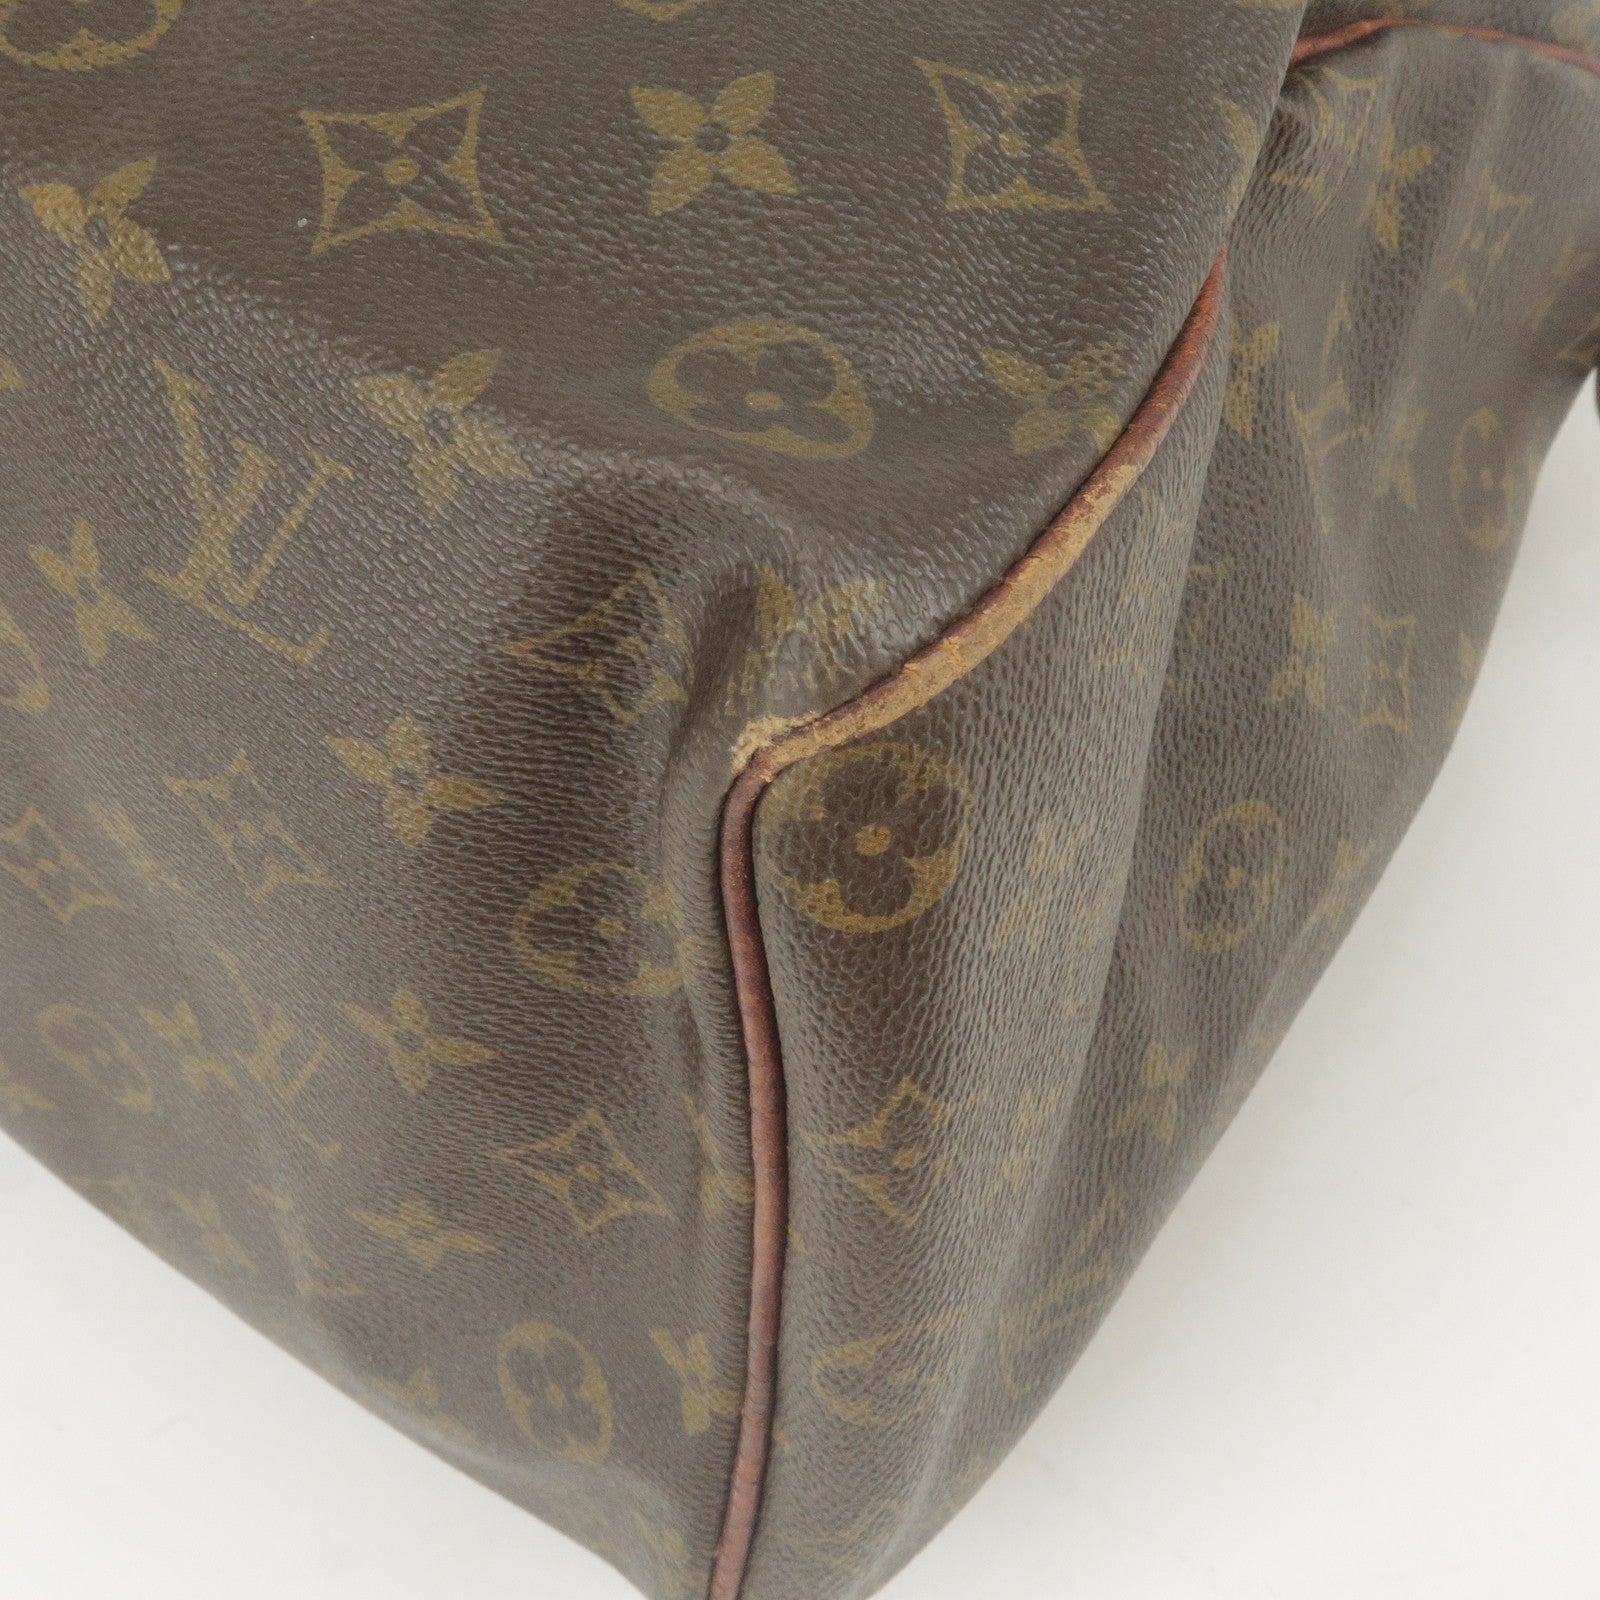 Louis Vuitton Artsy Azur 100% Authentic Comes With Silk Scarf to